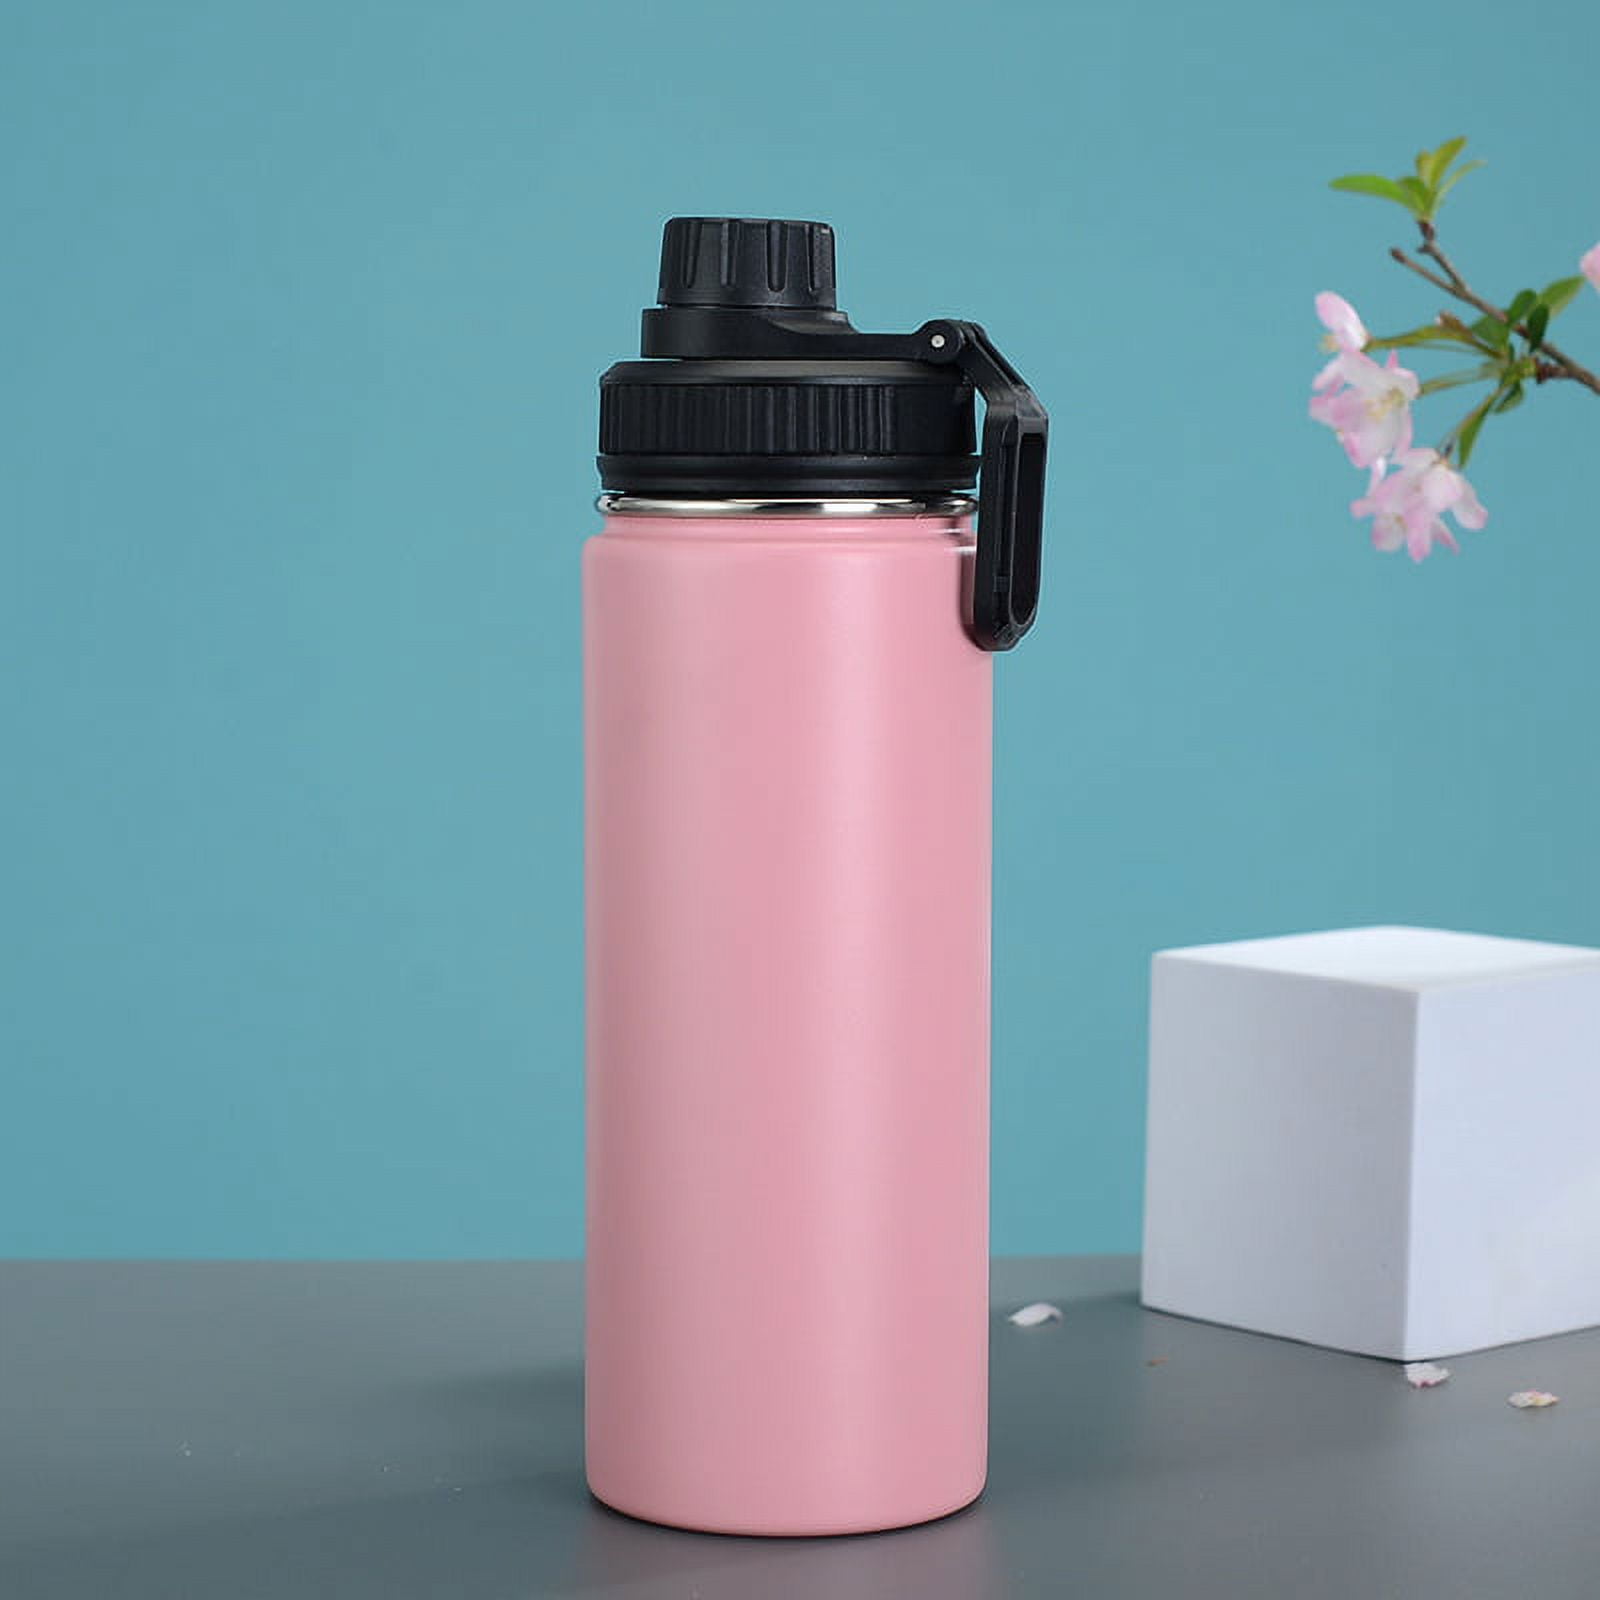 Homgreen Insulated Water Bottle with Straw, Stainless Steel